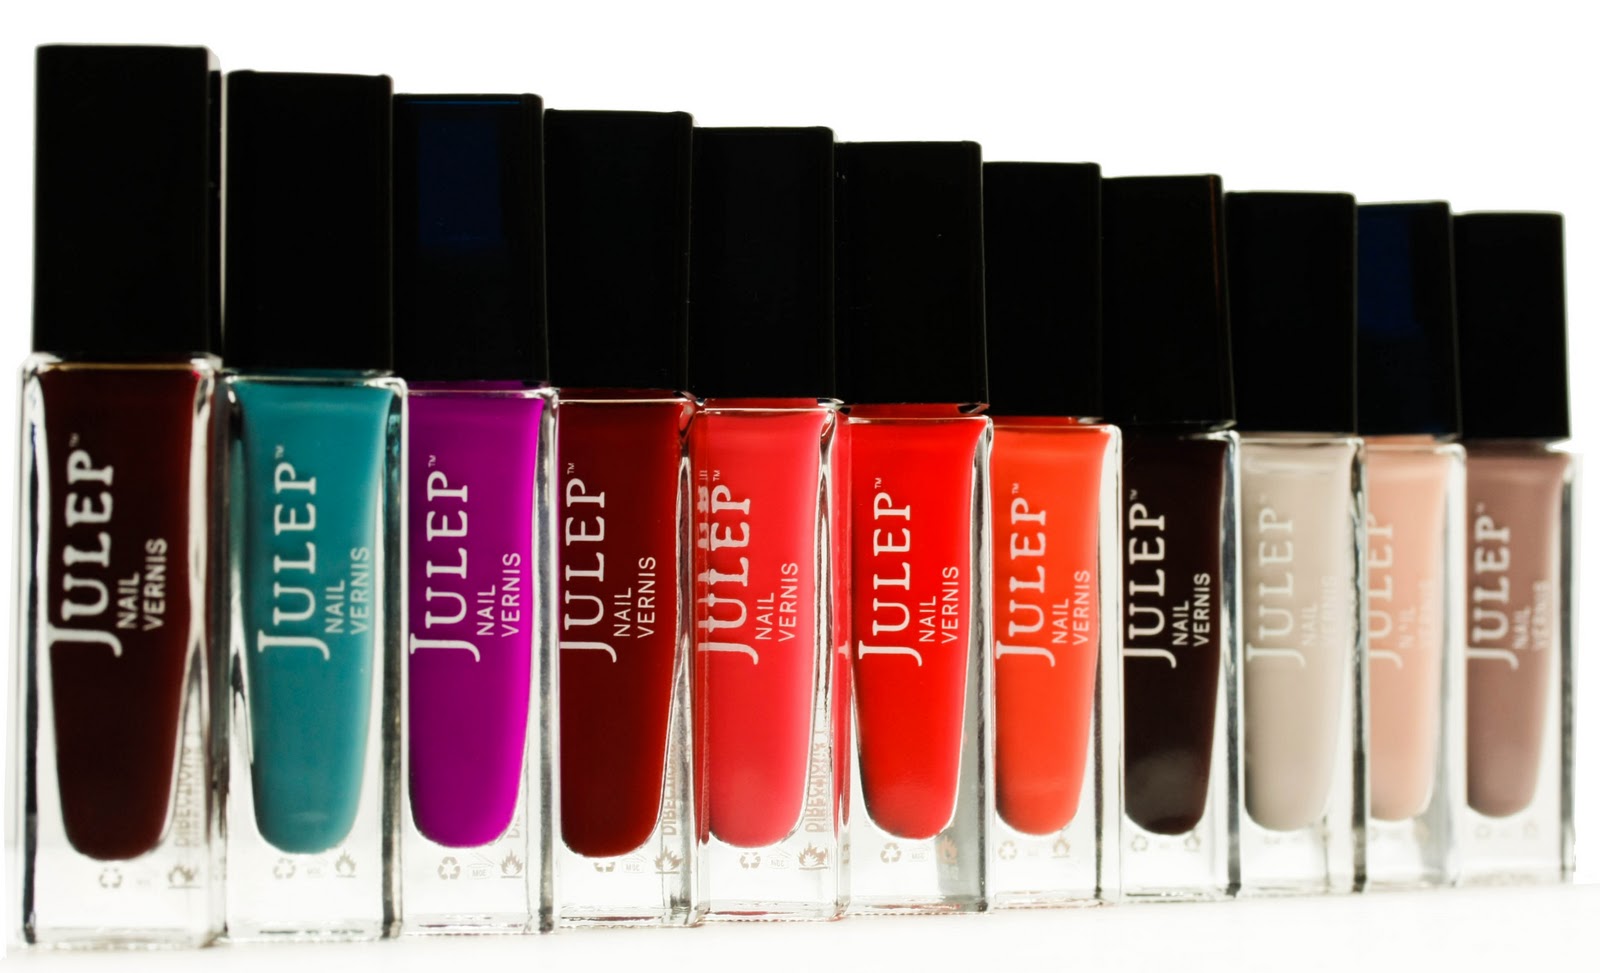 Have you ever tried Julep nail polish? I haven't. However, I have heard some